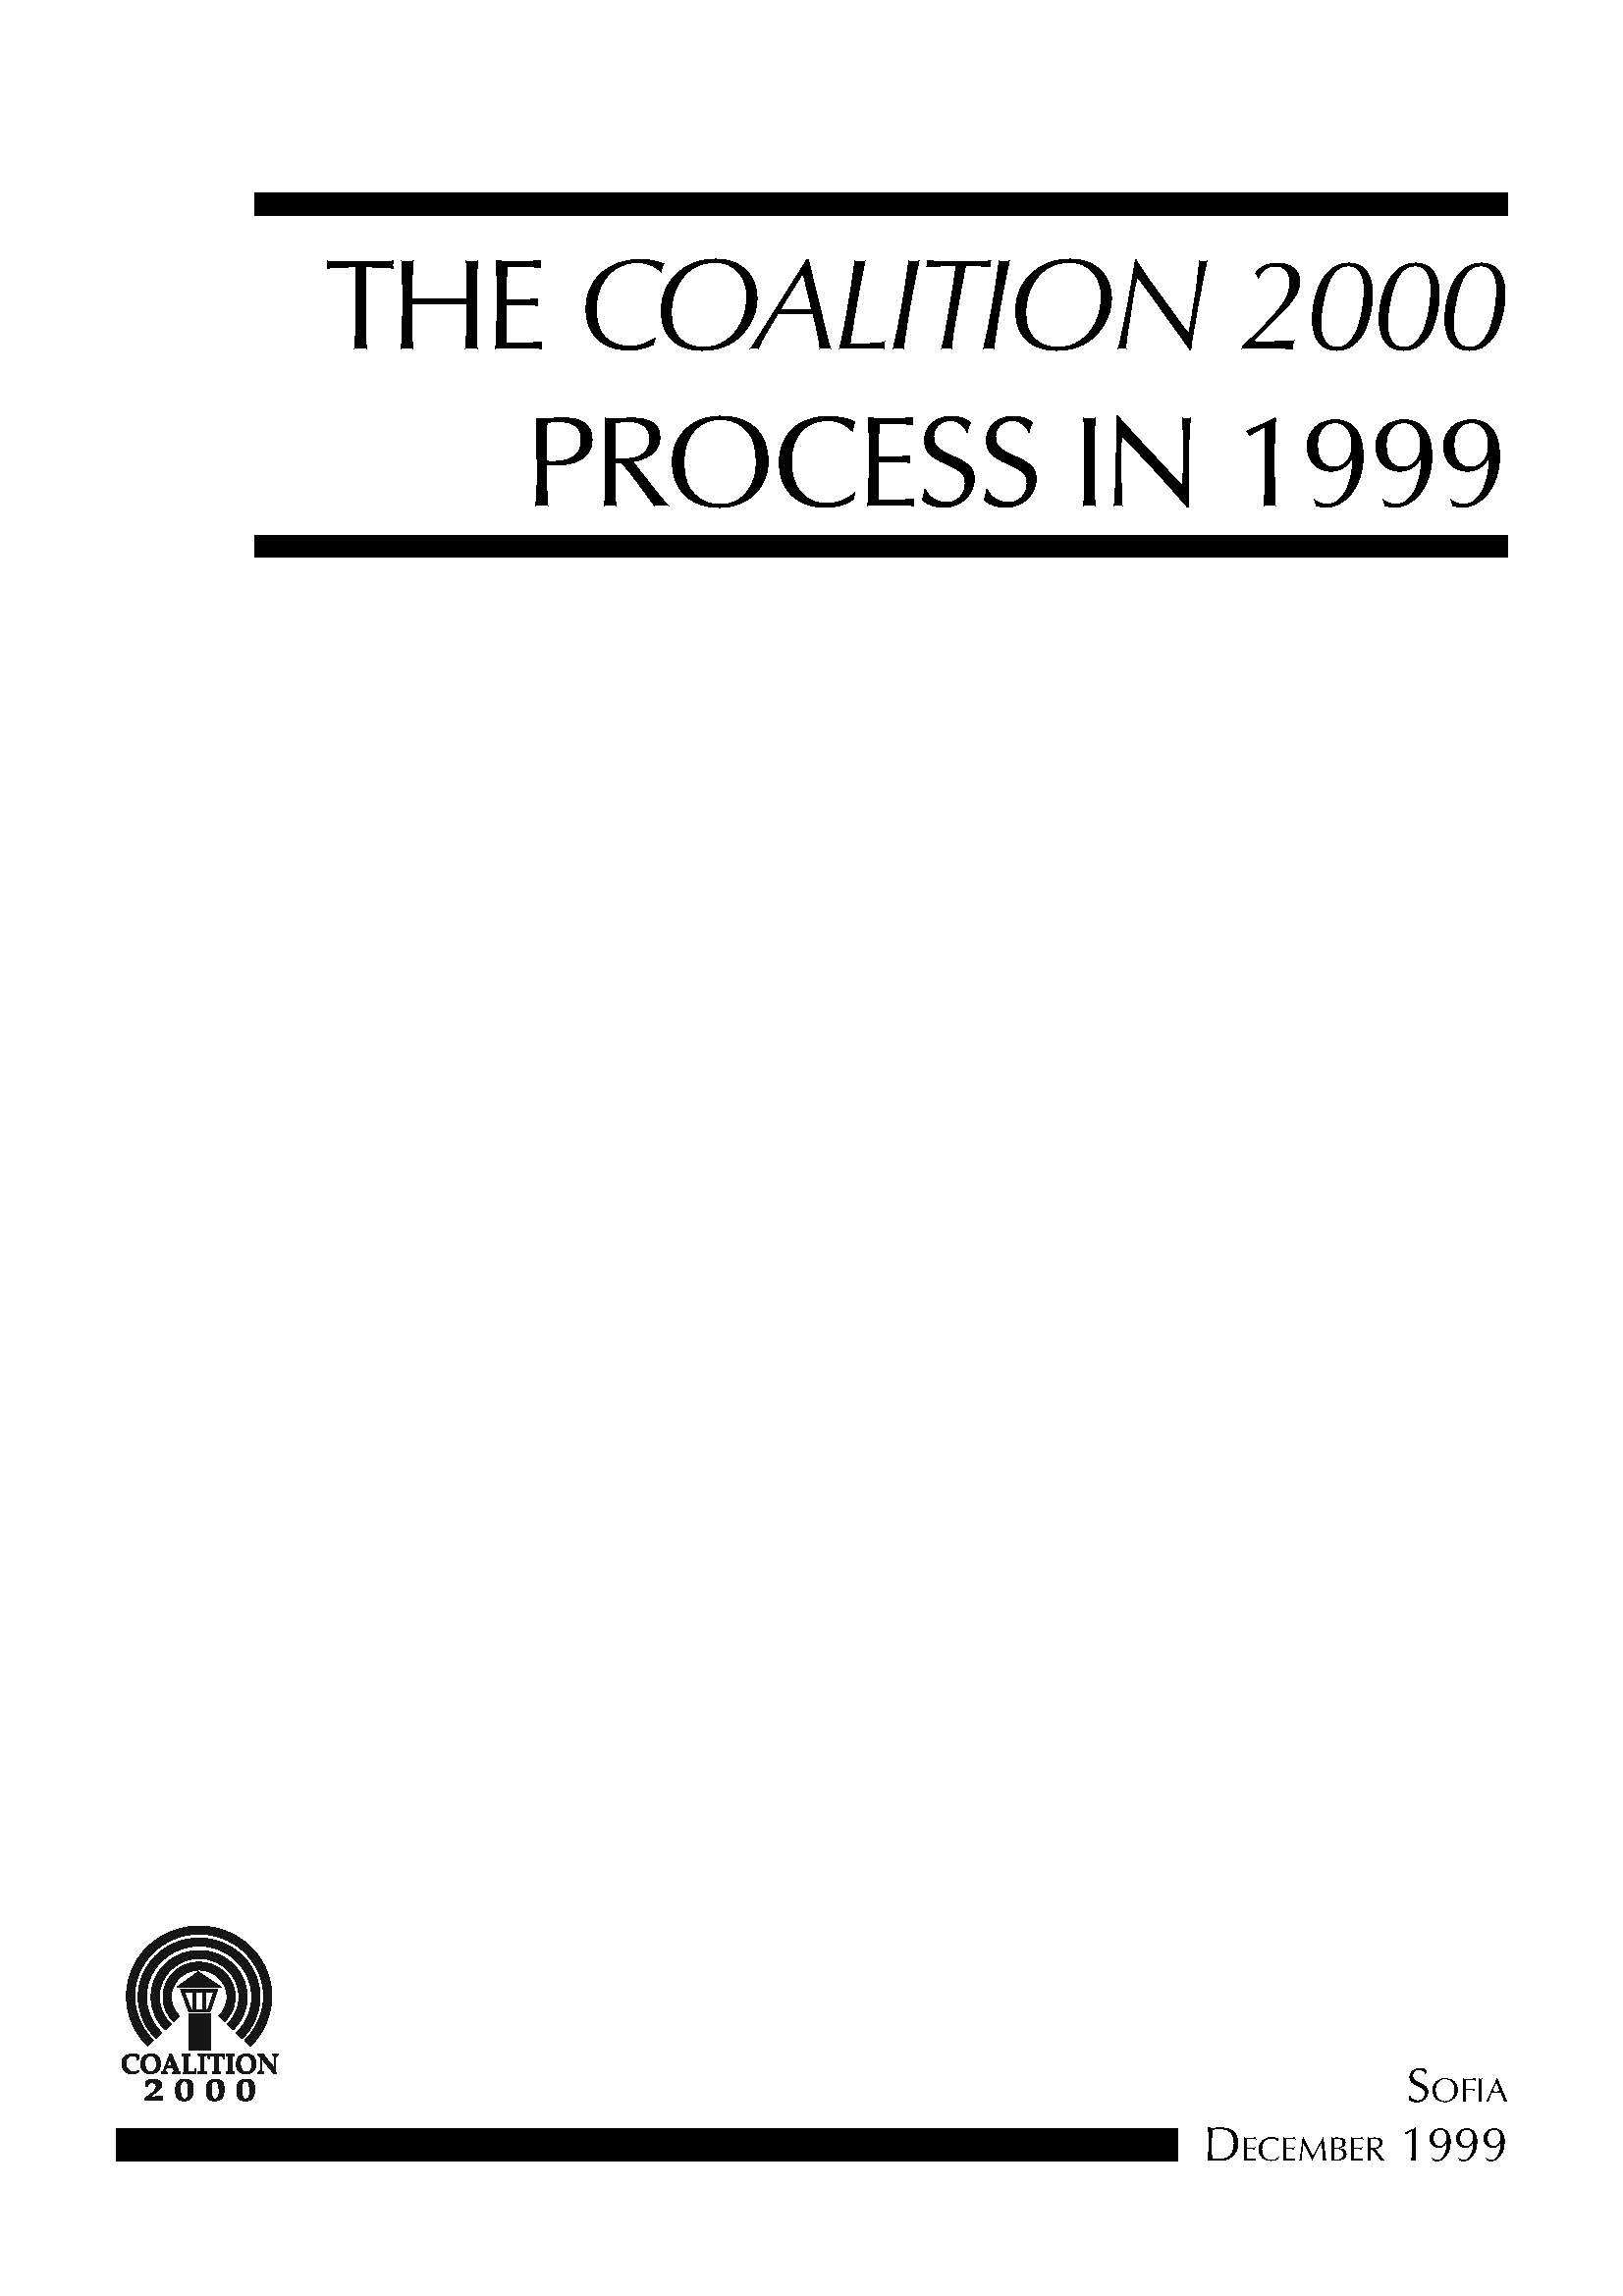 The Coaltion 2000: Process in 1999